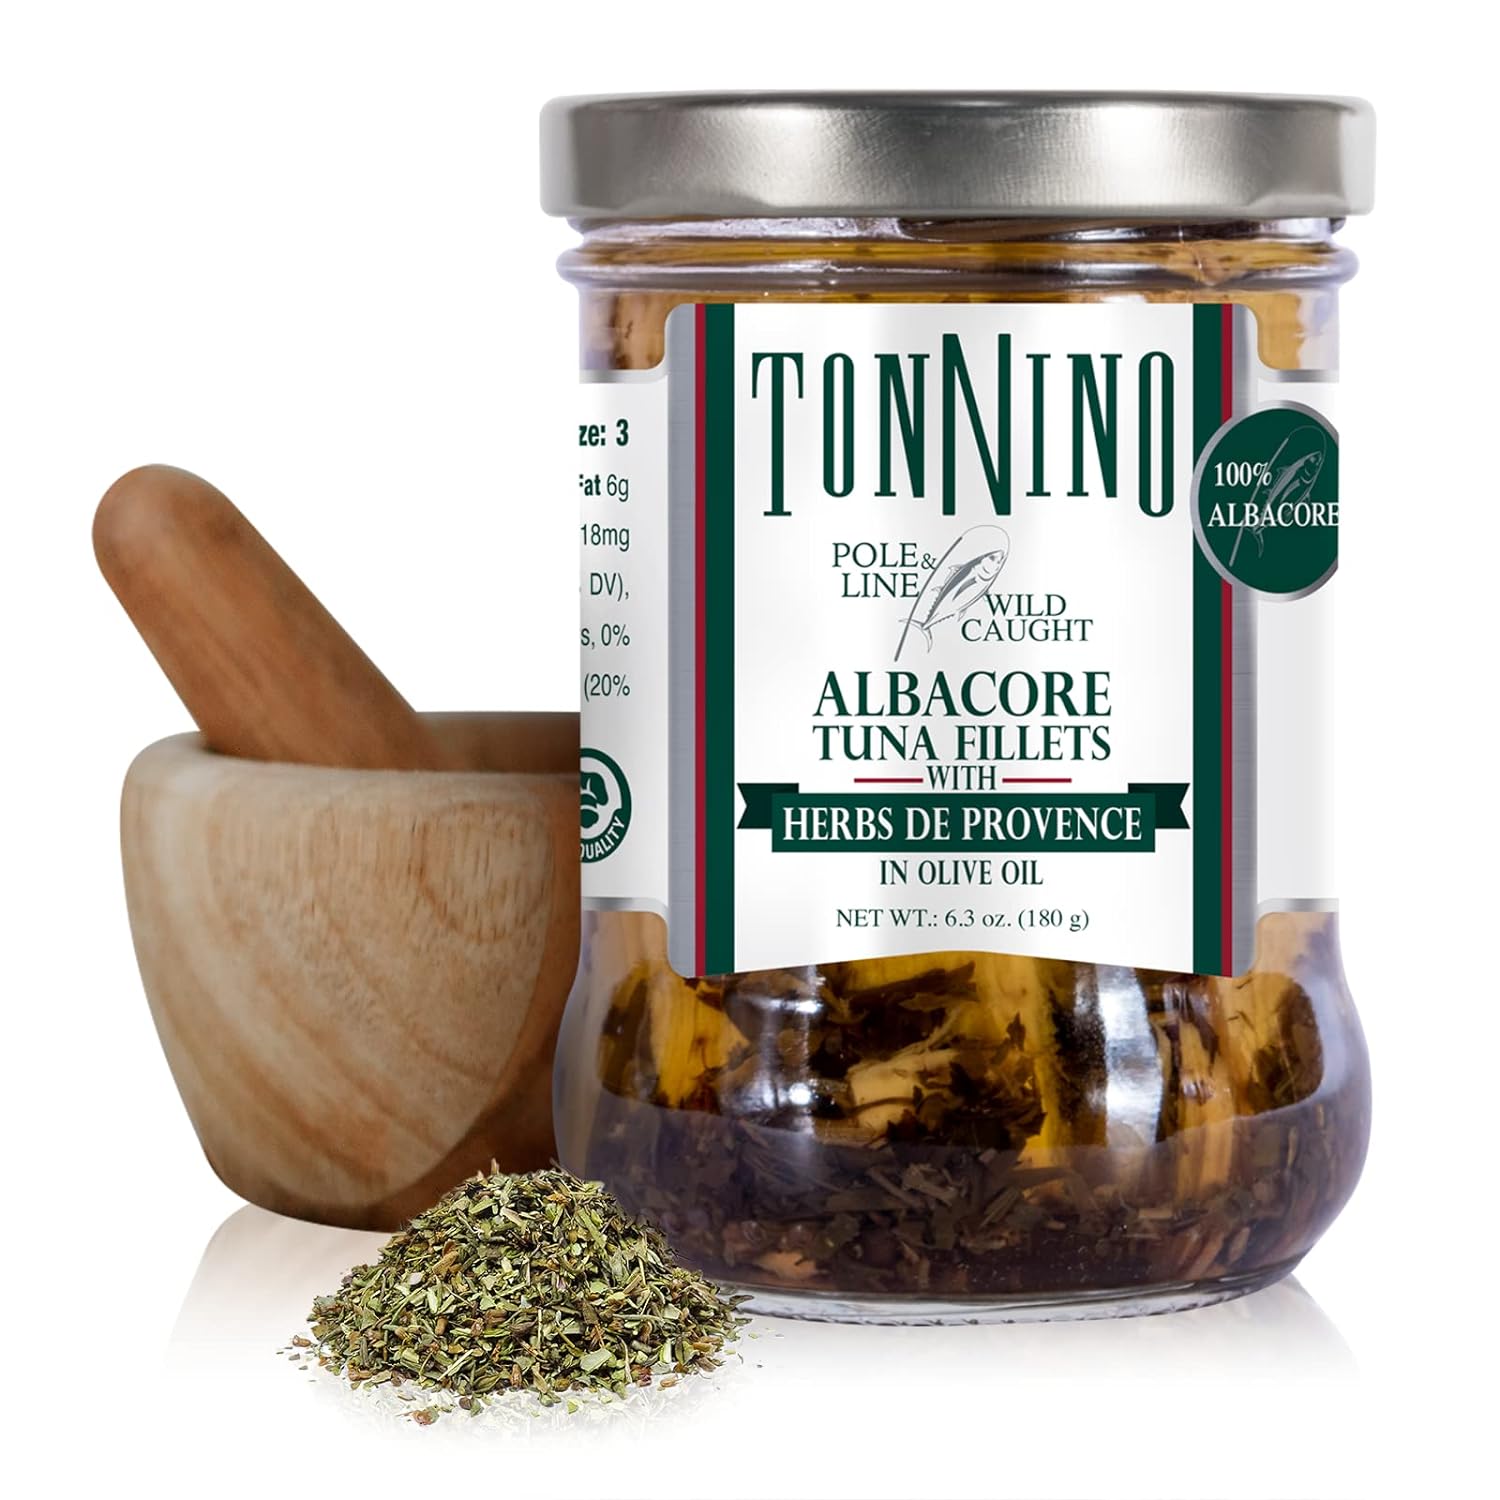 Tonnino Albacore Tuna in oilve oil with Herbs de Provence 6-Pack Omega-3 Rich, High Protein, Gluten-Free, Ready-to-Eat Tuna Packets for Tuna Salad, Tuna Fish Alternative to Salmon, Pole & Line Caught